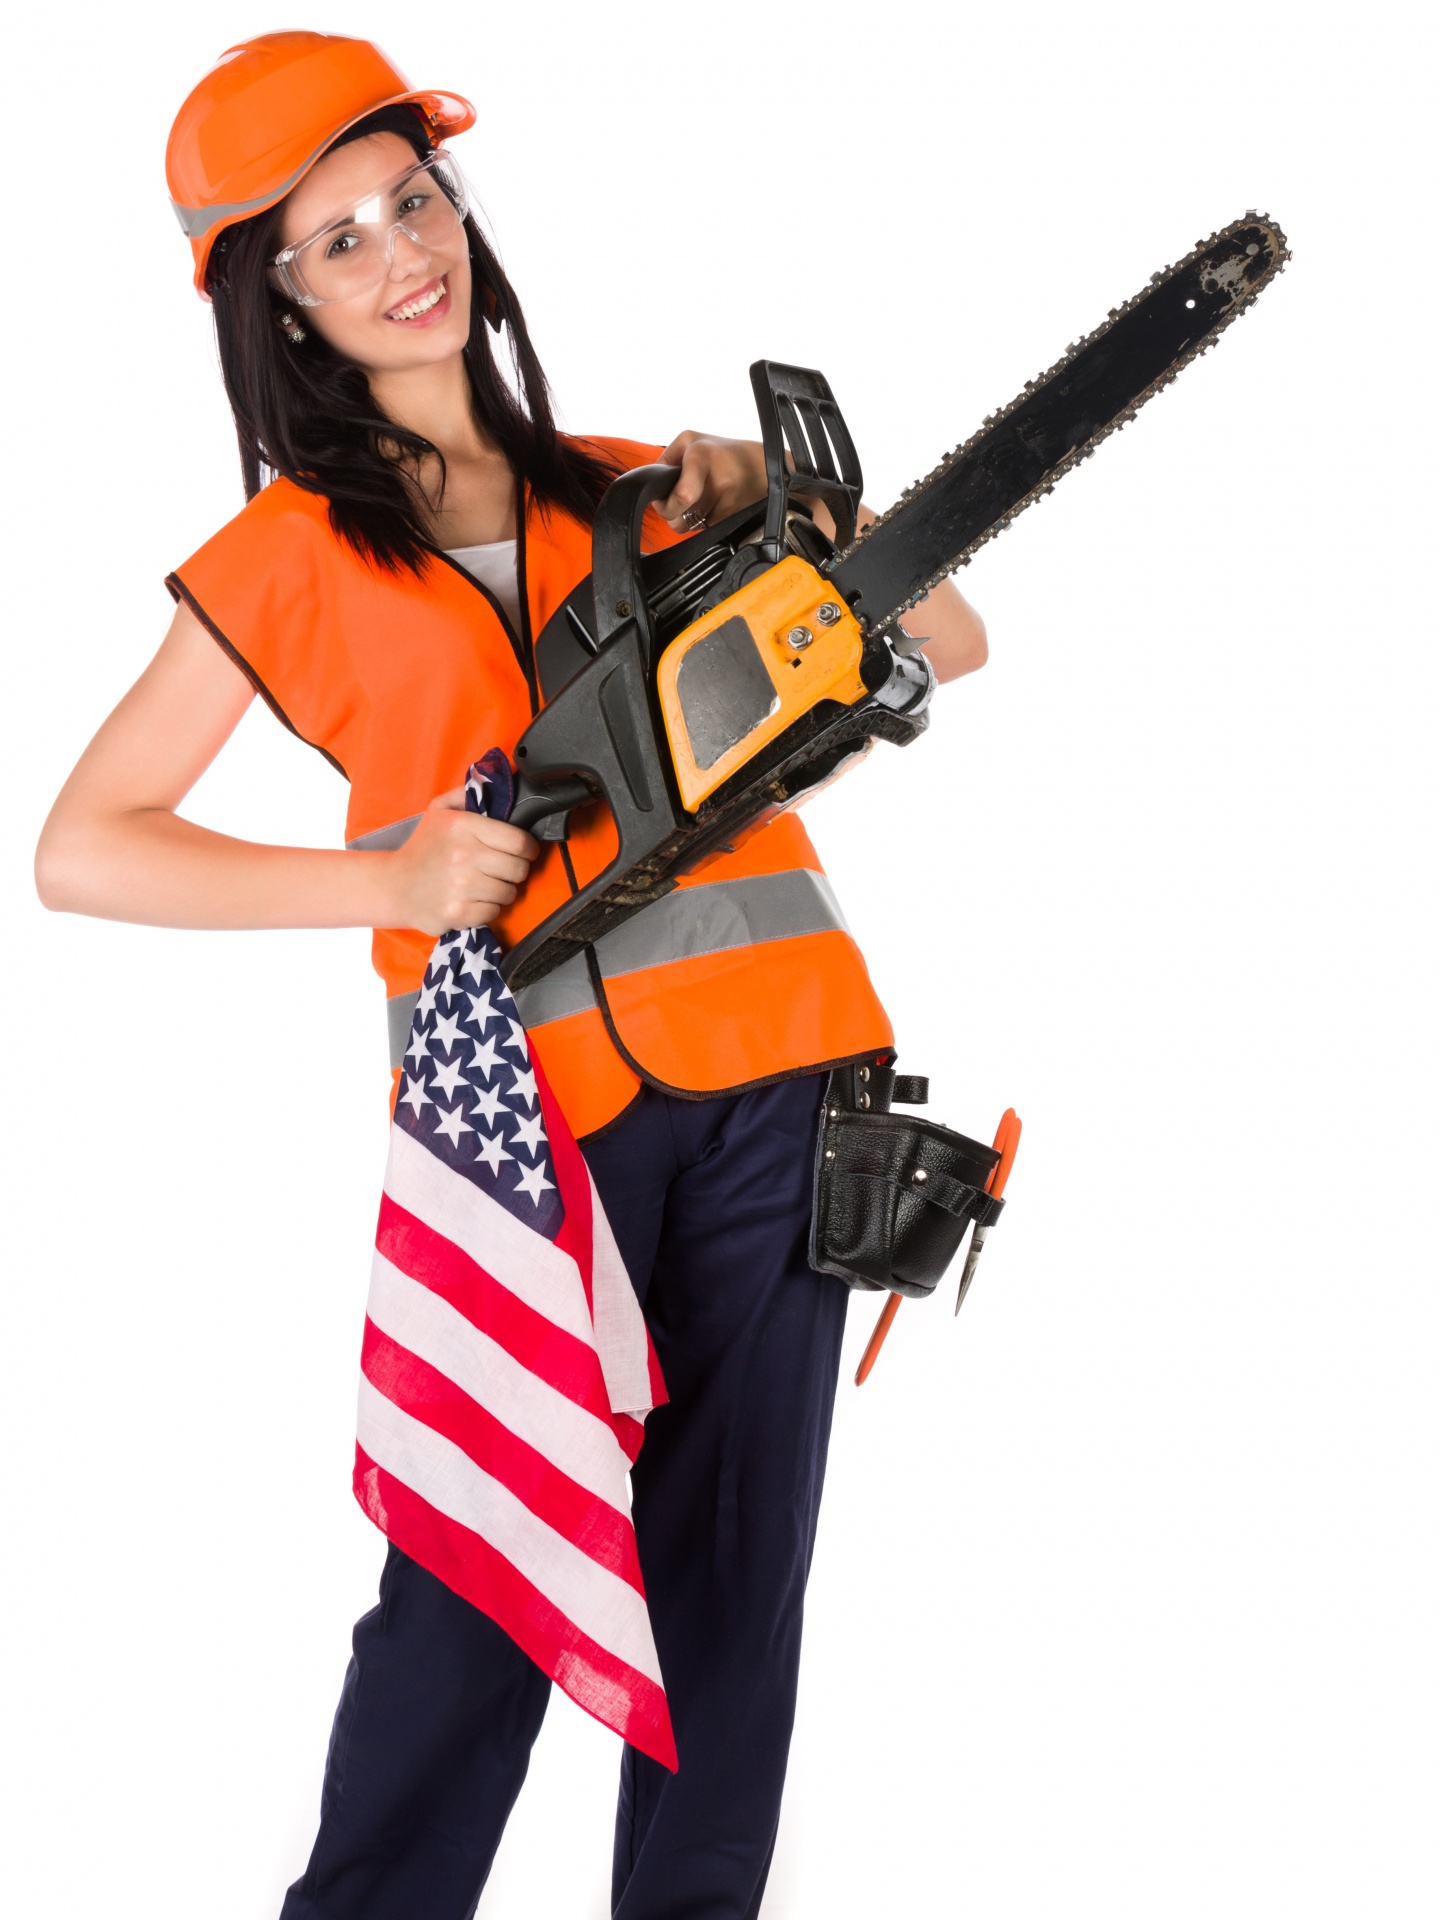 Young woman celebrating a Labor Day. Holding a Chainsaw.